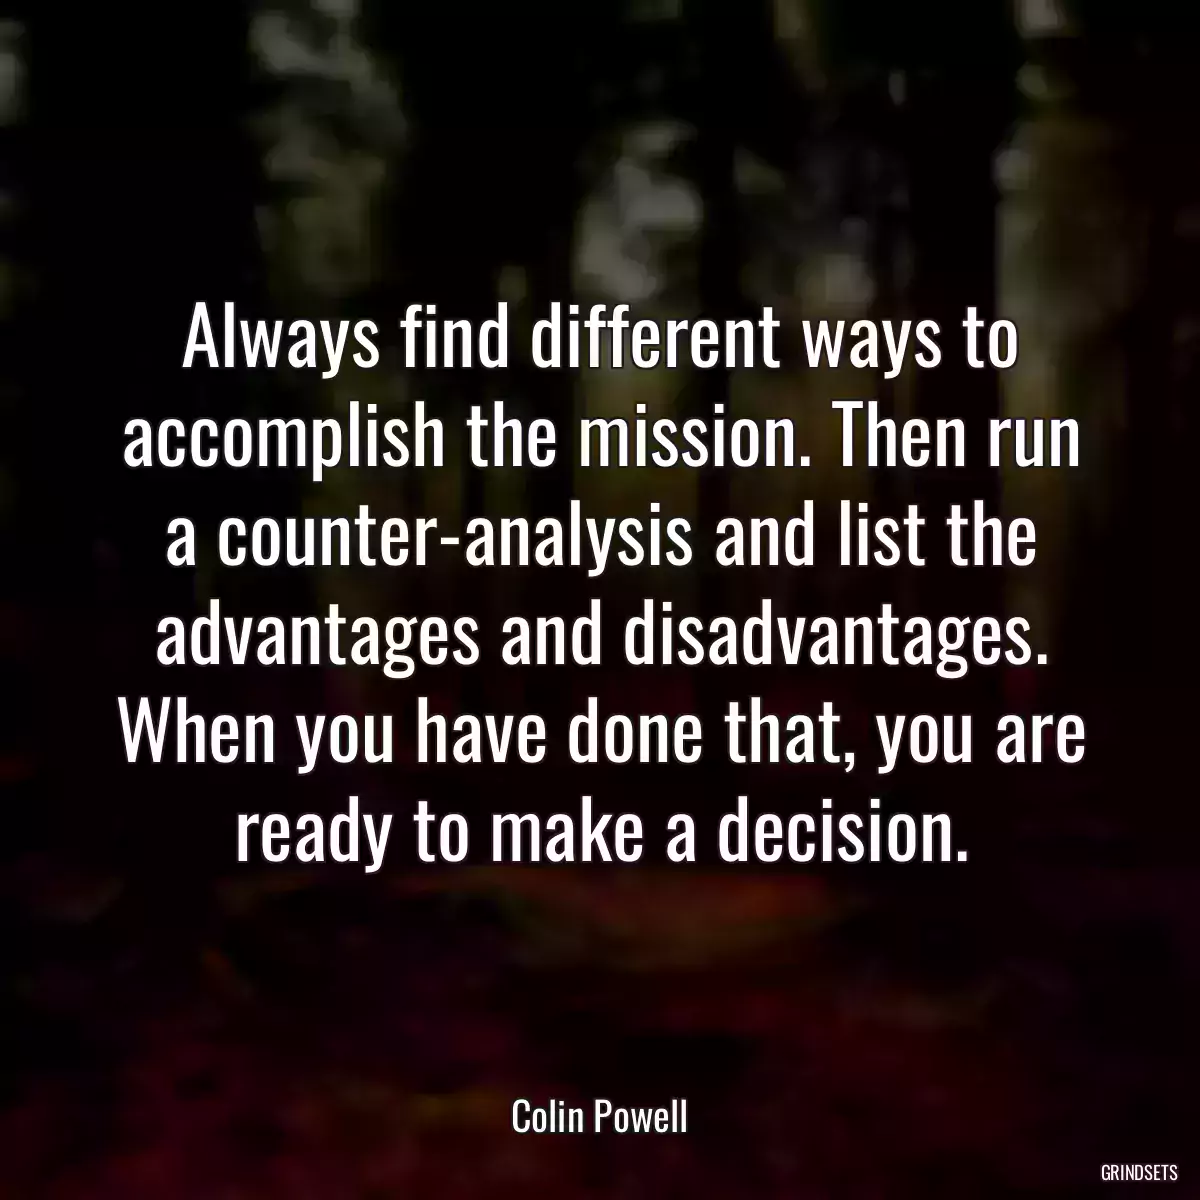 Always find different ways to accomplish the mission. Then run a counter-analysis and list the advantages and disadvantages. When you have done that, you are ready to make a decision.